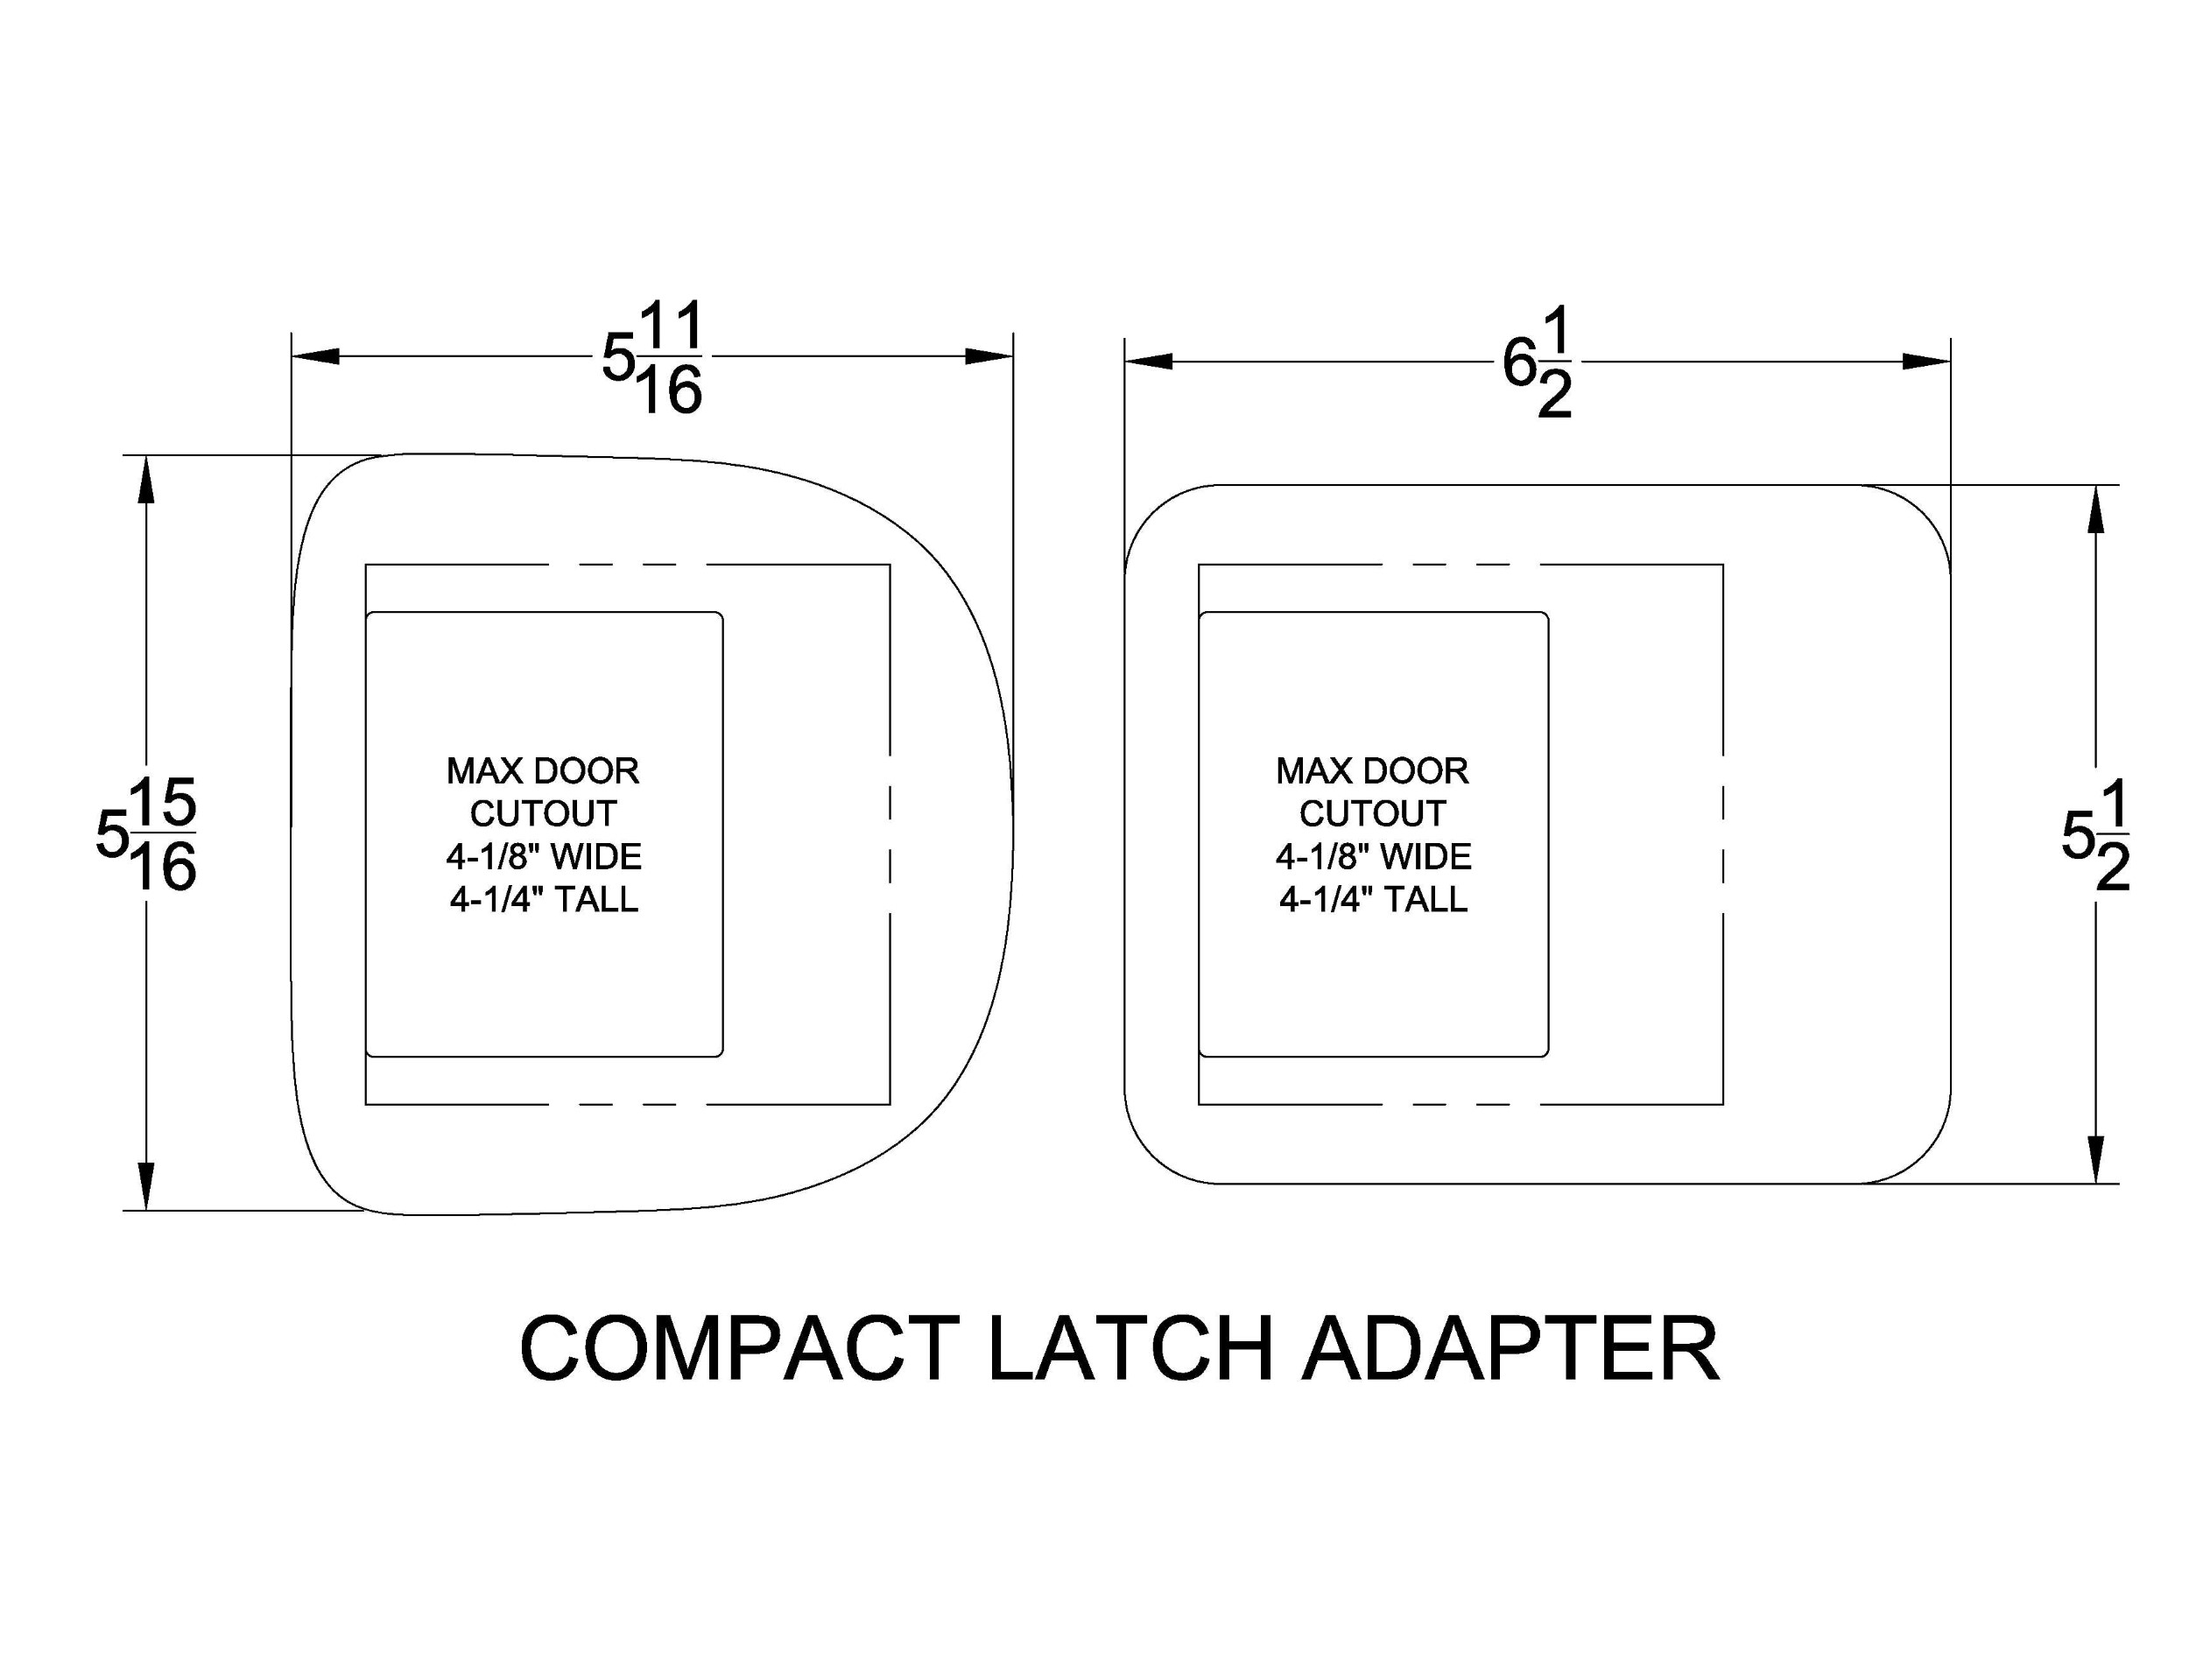 RVLock Compact Latch Adapter Dimensions